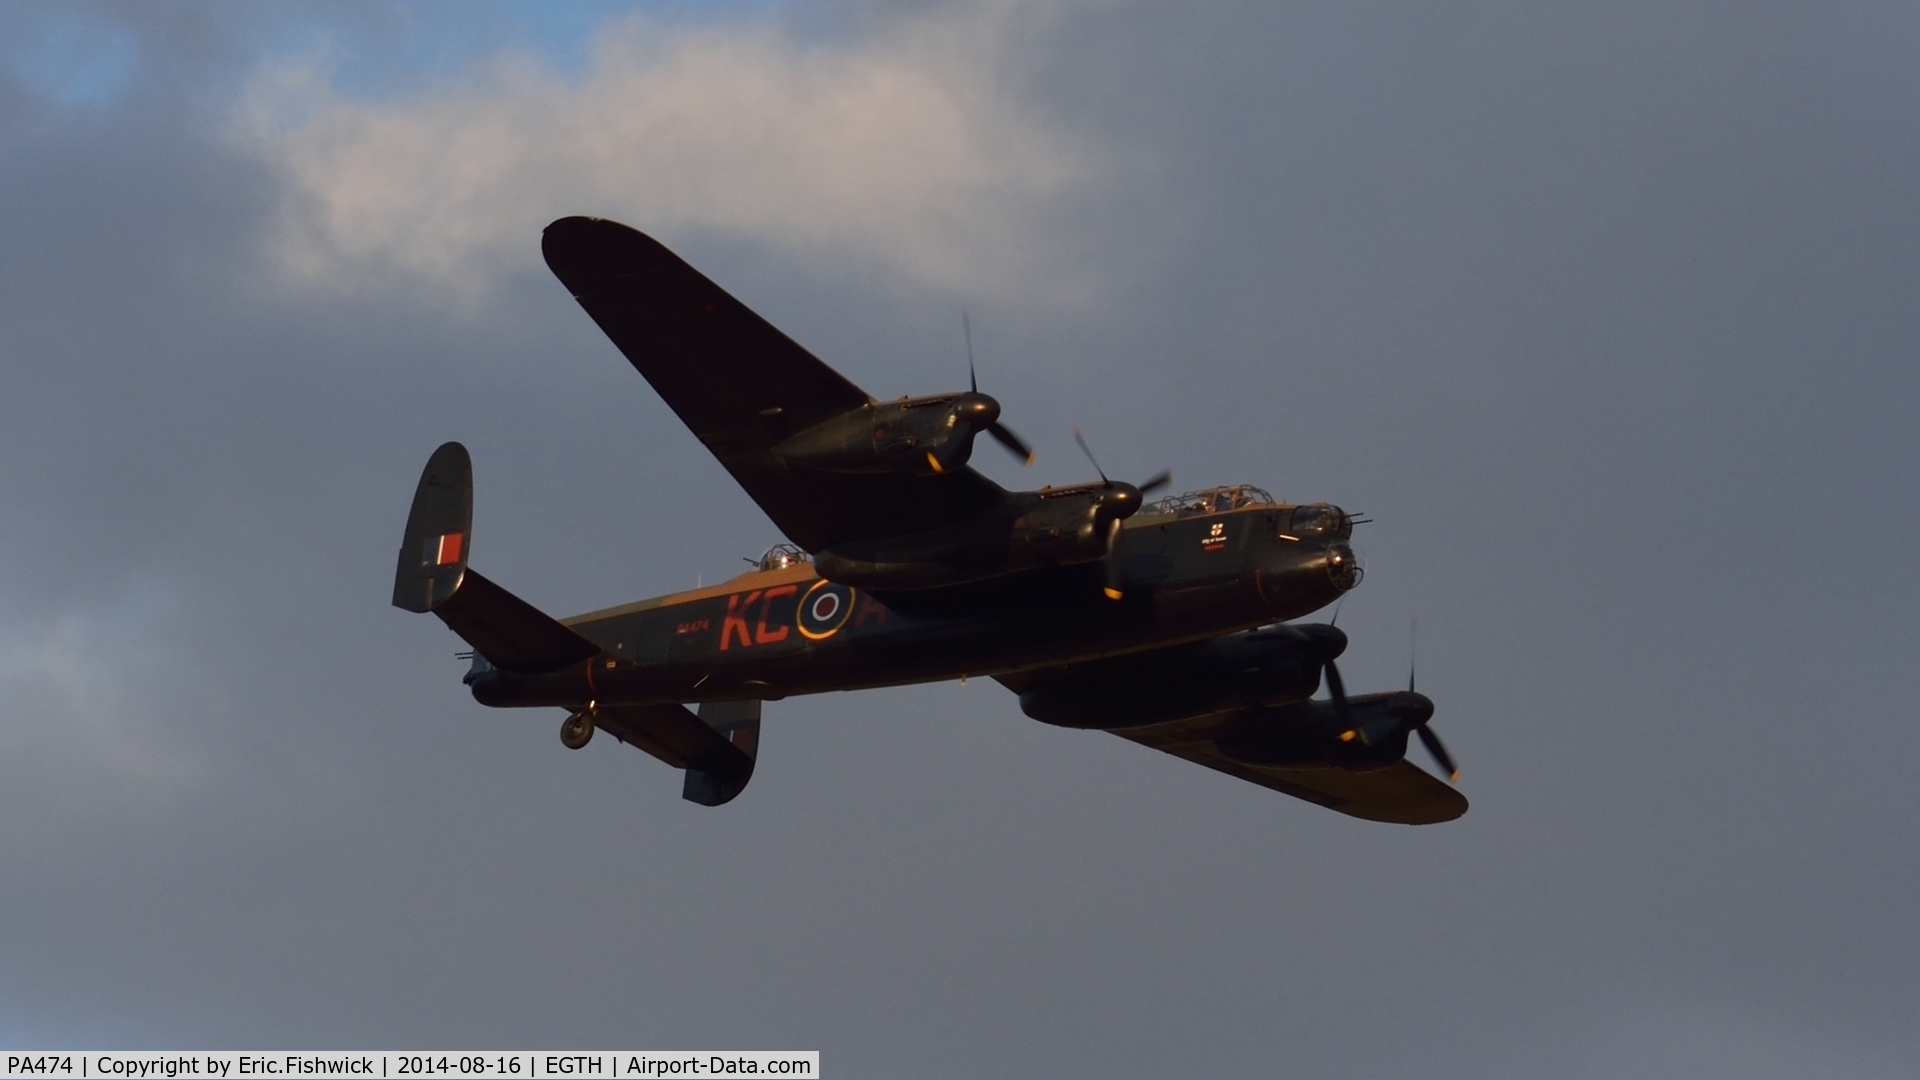 PA474, 1945 Avro 683 Lancaster B1 C/N VACH0052/D2973, 44. PA474 at The Shuttleworth Collection Flying Proms, Aug. 2014.